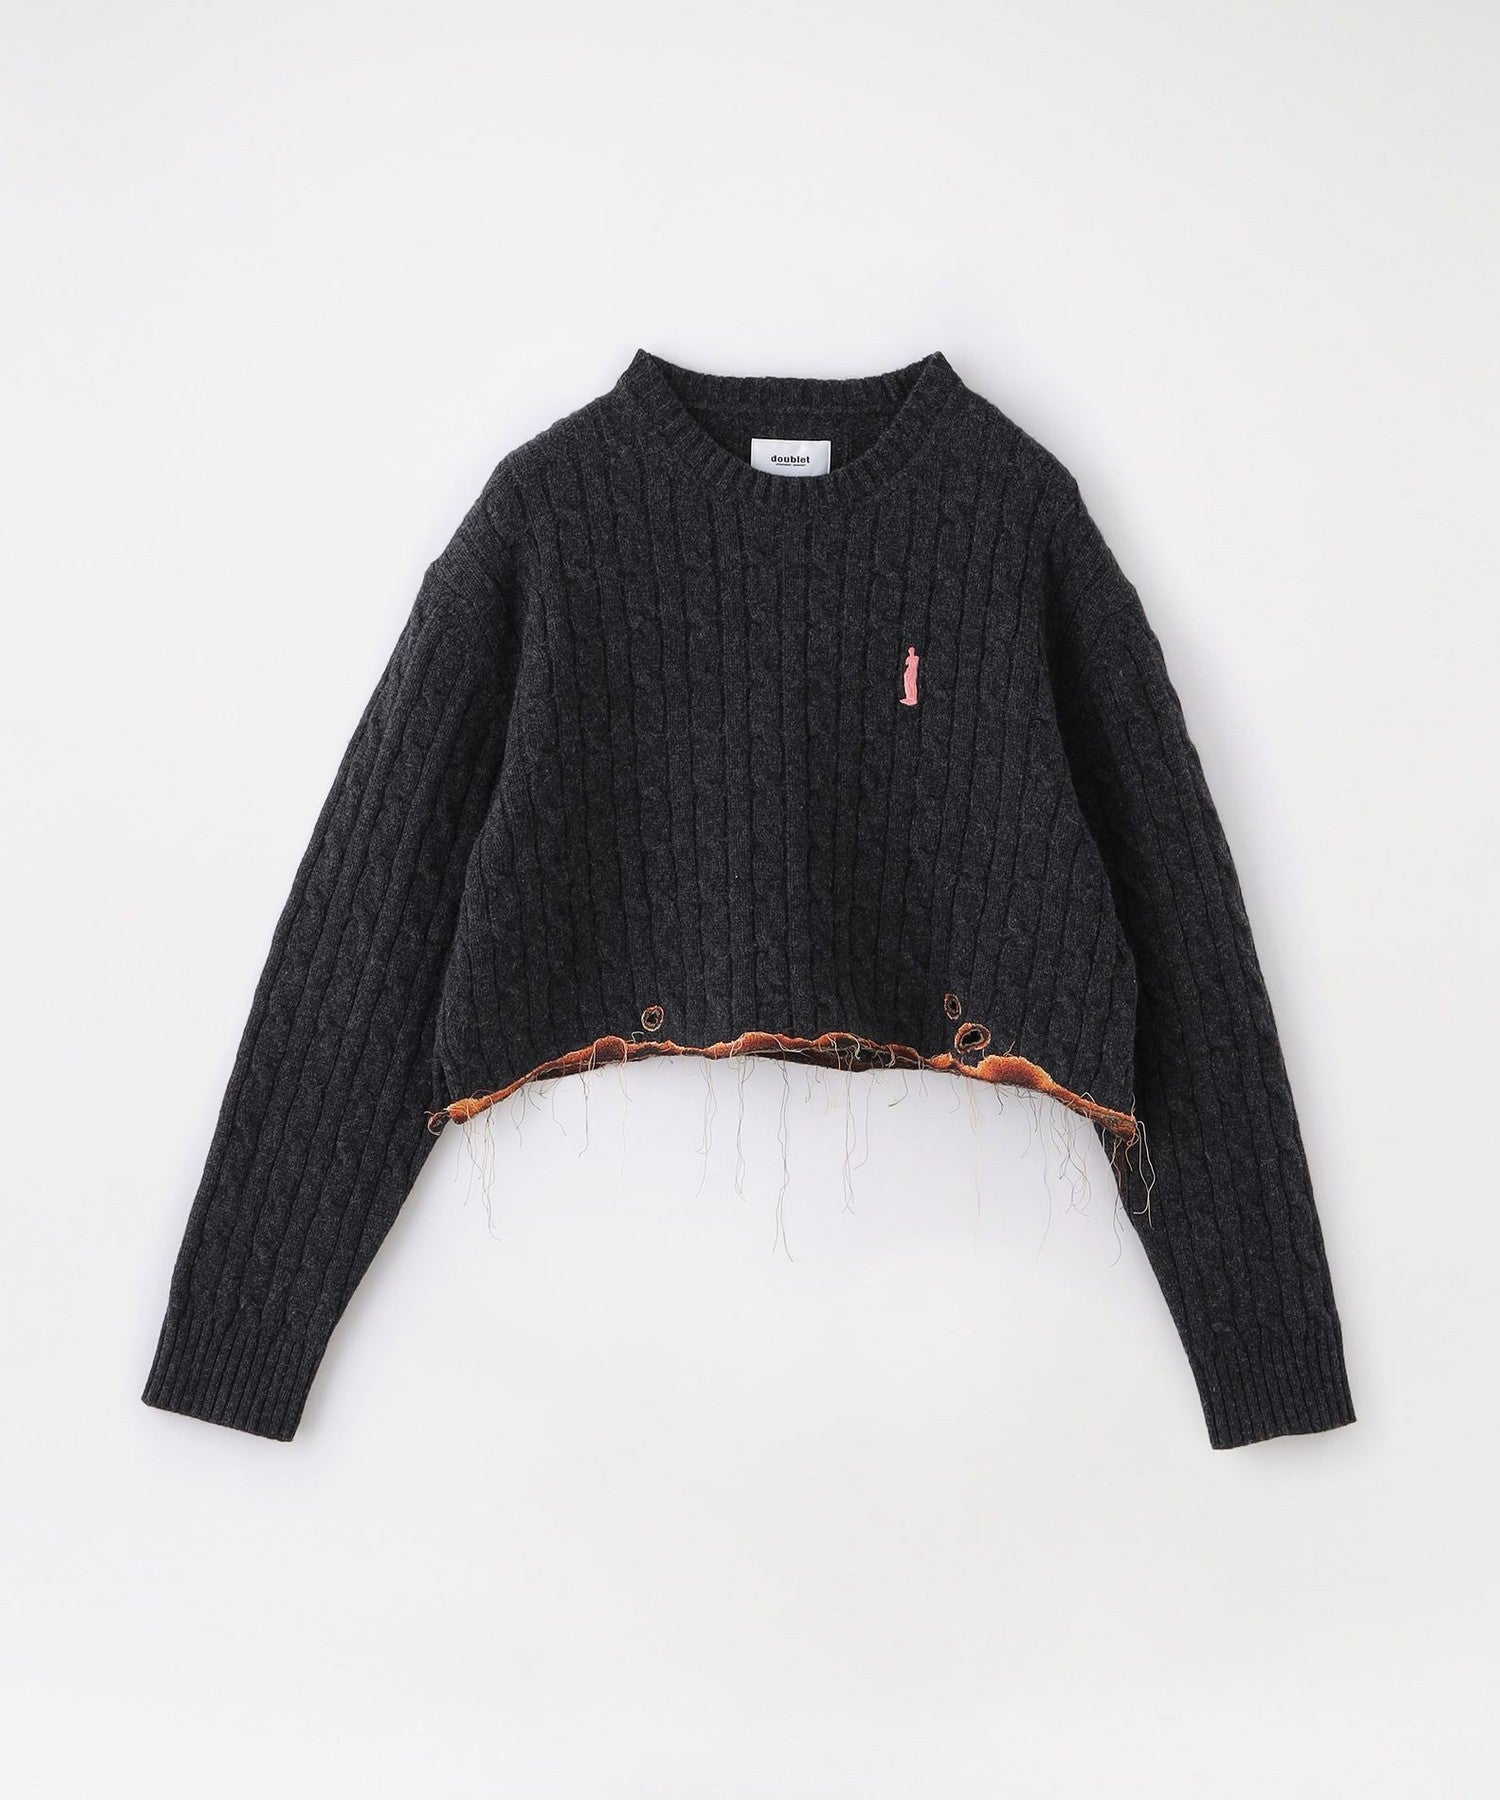 doublet】ニット BURNING EMBROIDERY KNIT PULLOVER 22AW47KN89 